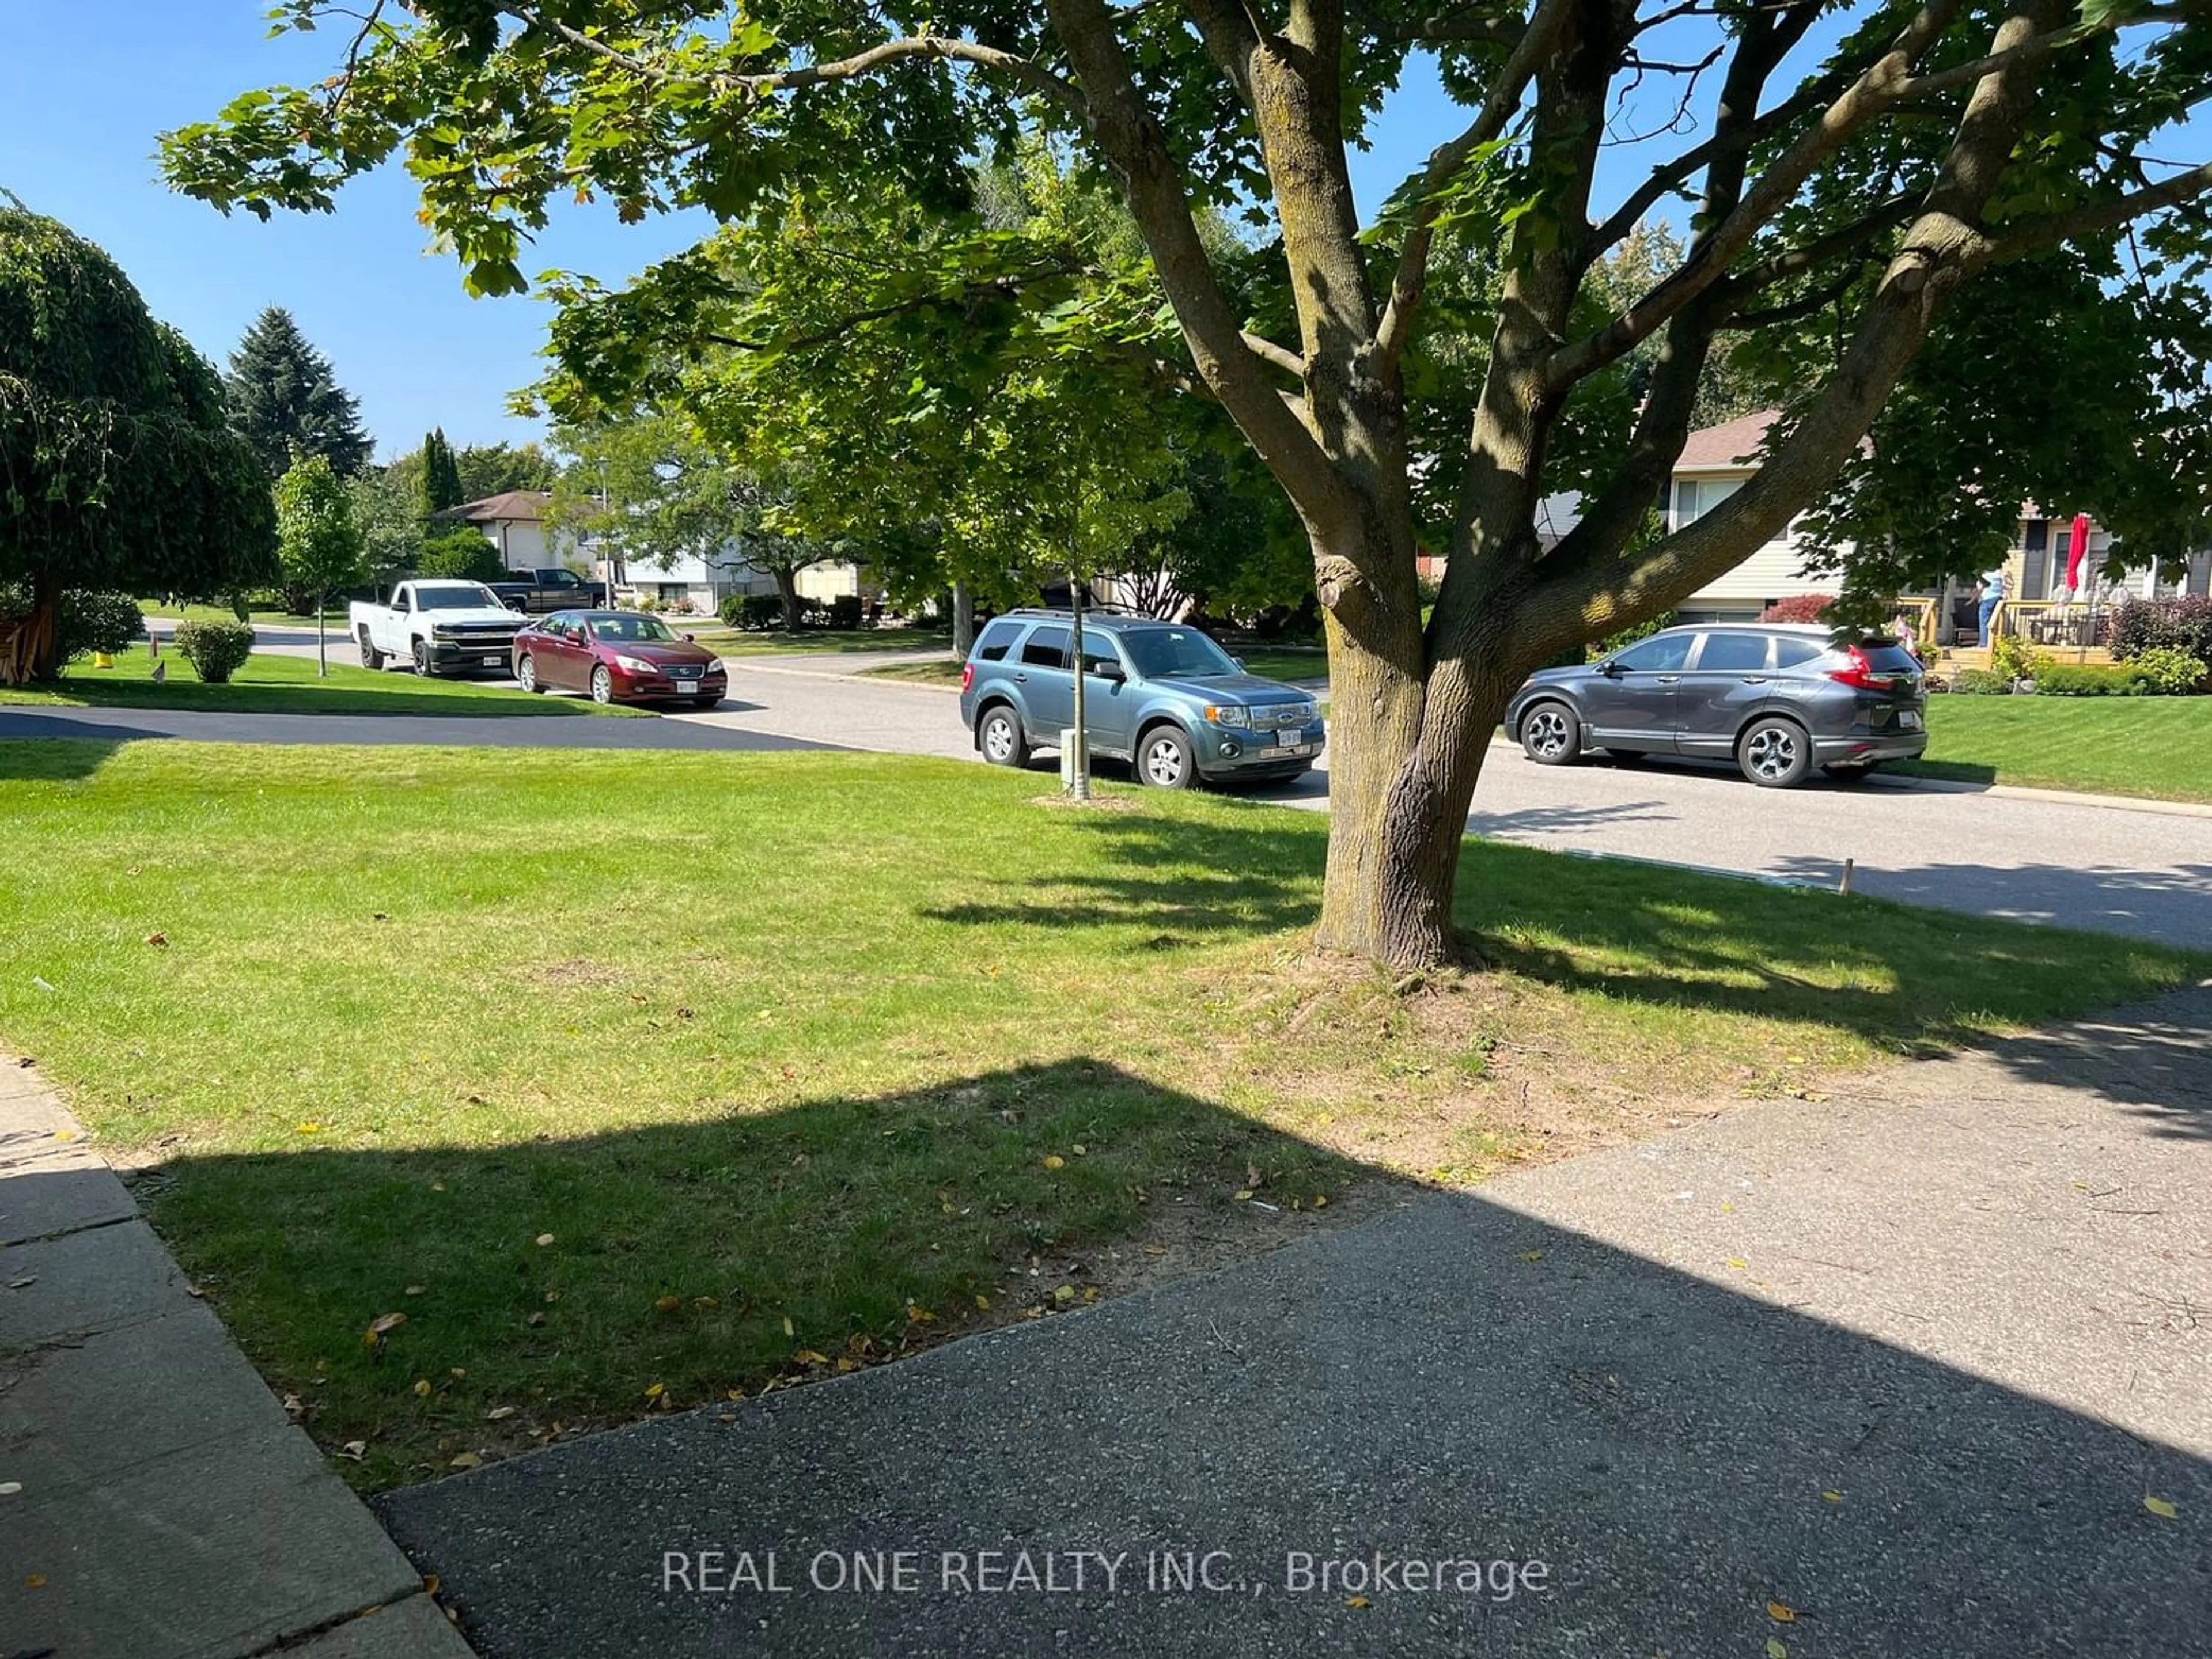 Street view for 44 Banting Cres, London Ontario N6G 4G2